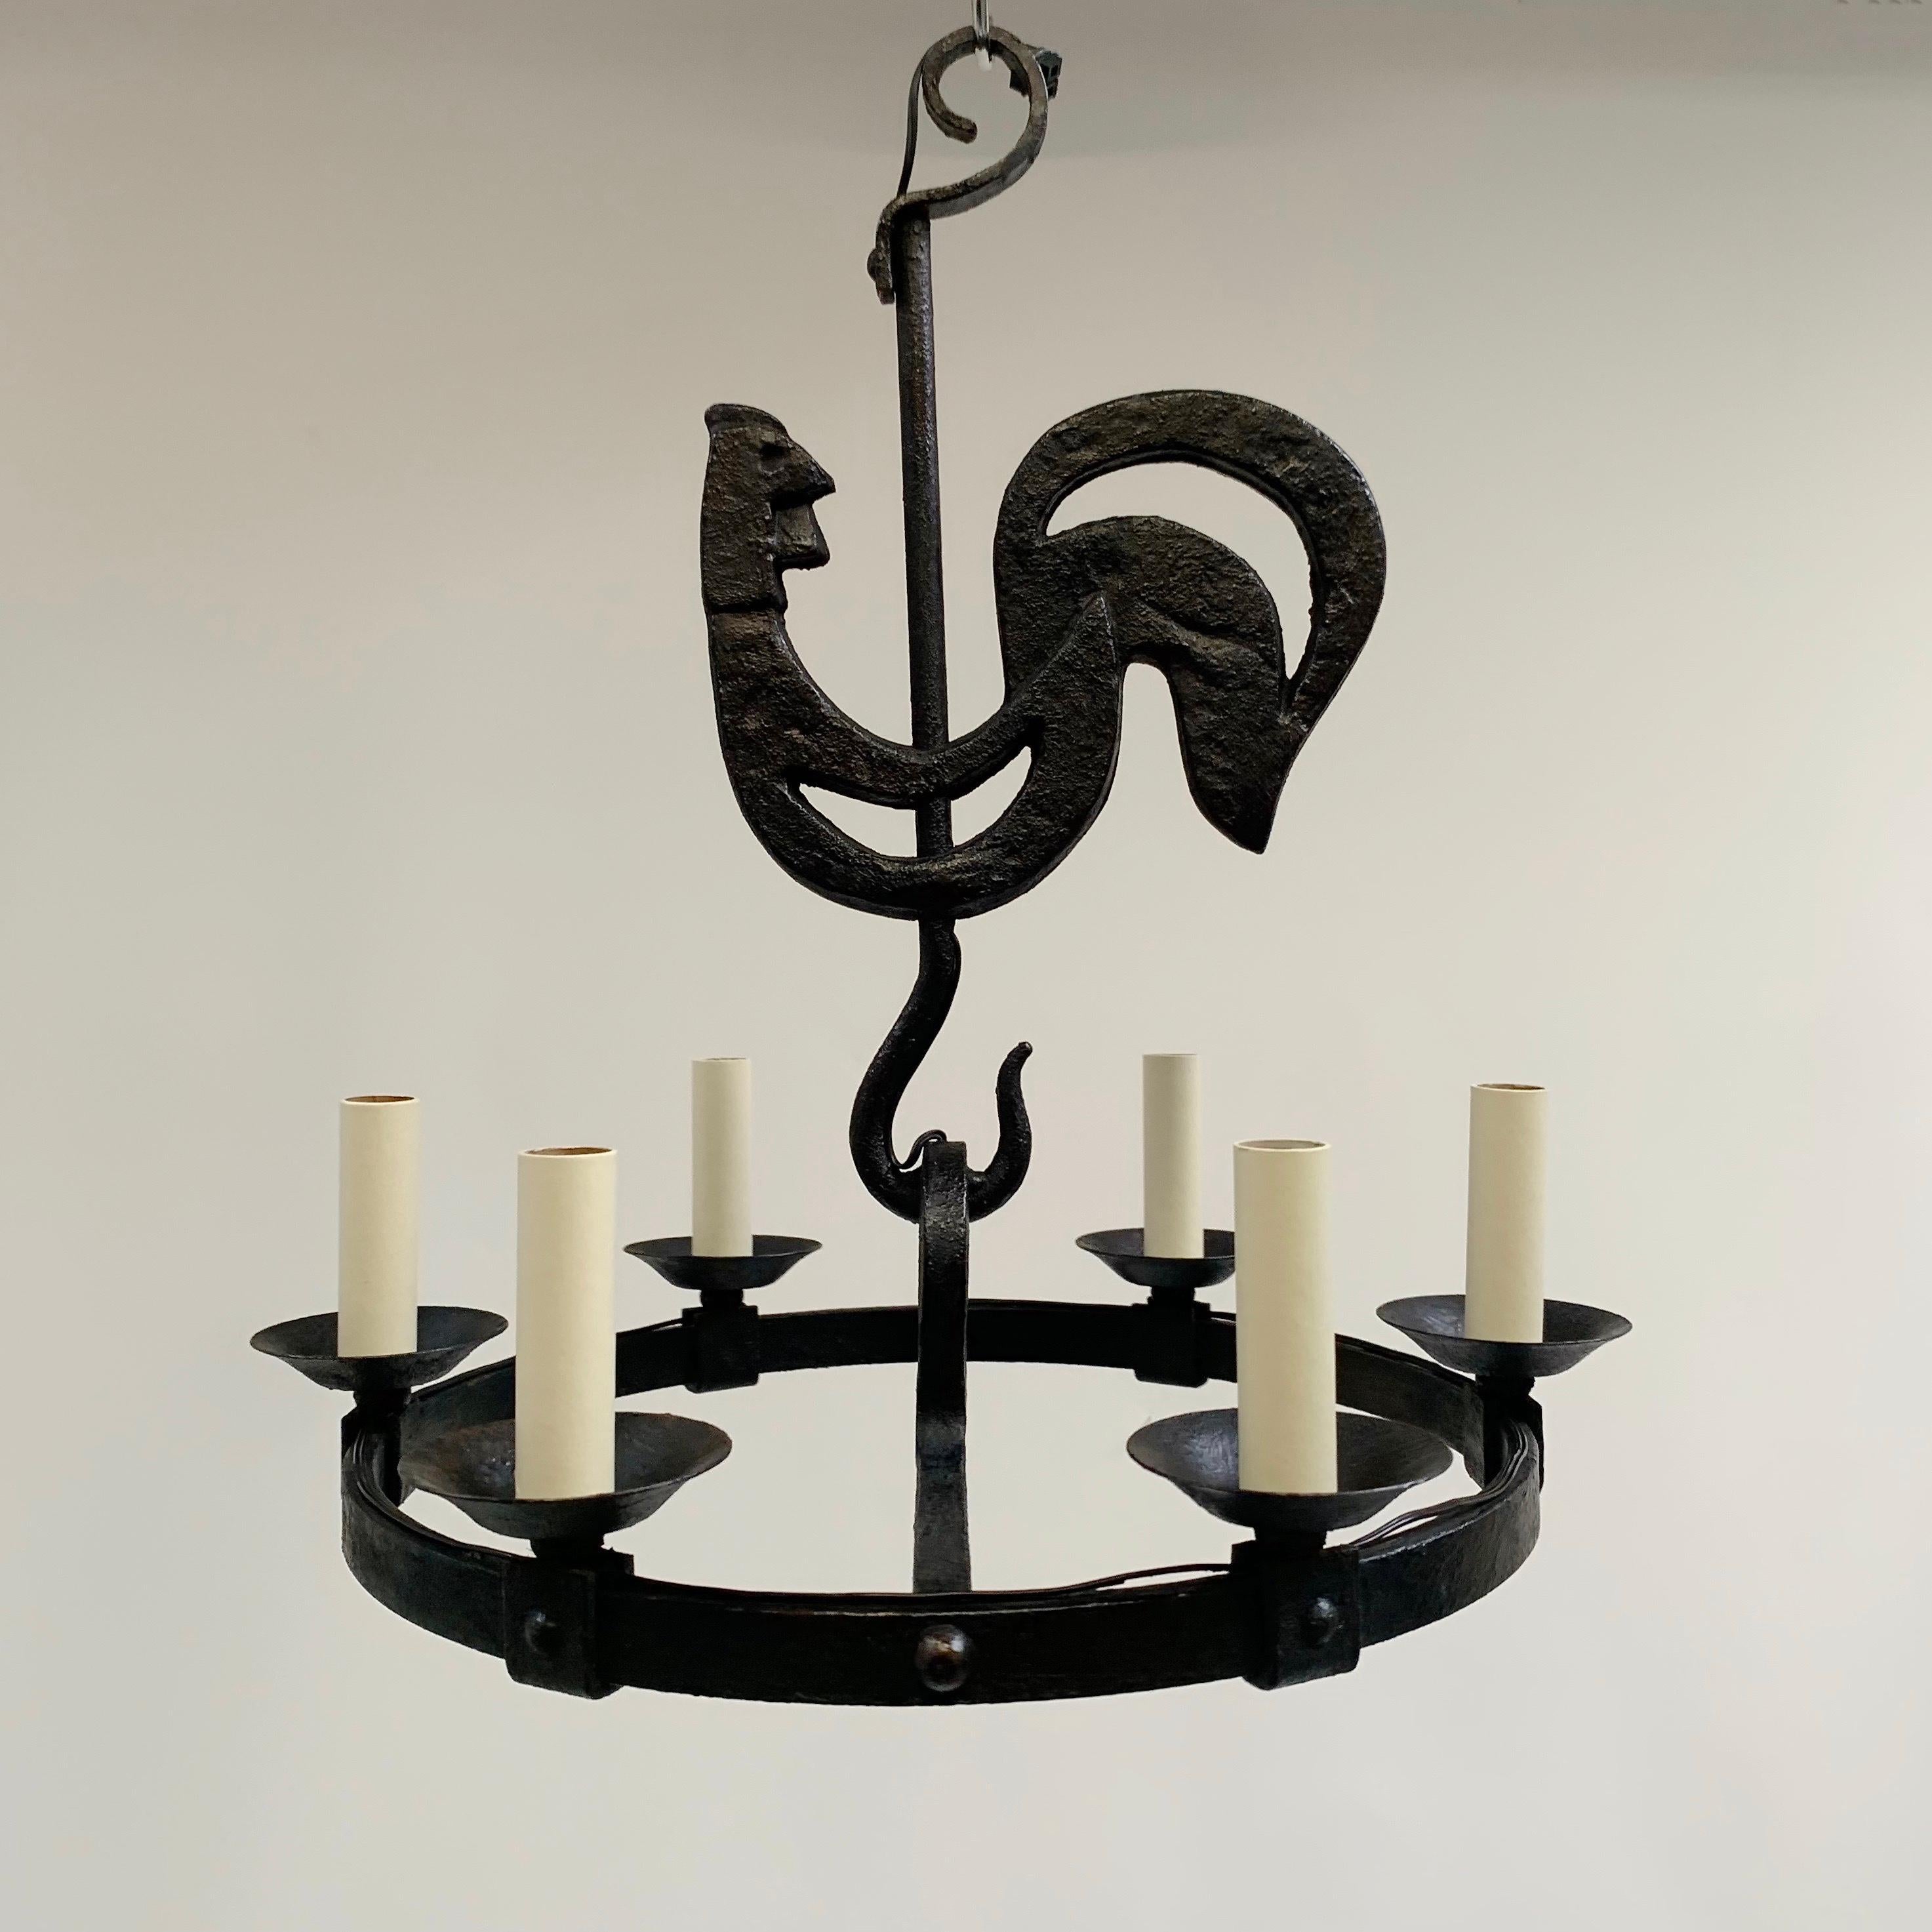 Mid-20th Century Mid-Century Black Wrought Iron Girouette Chandelier, France circa 1950. For Sale